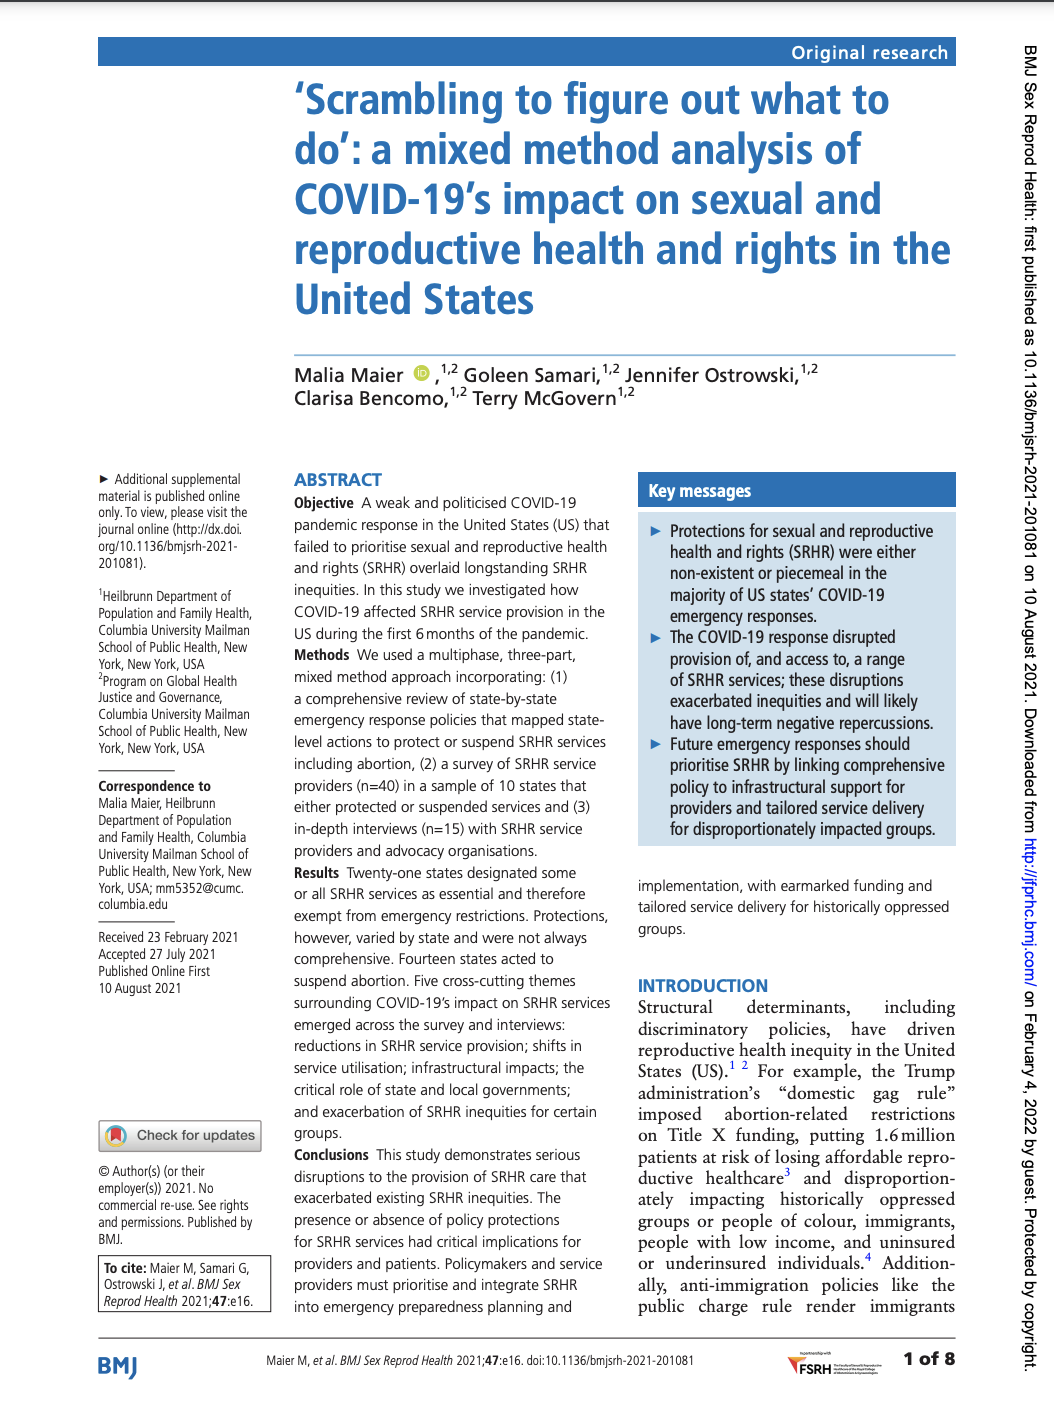 ‘Scrambling to figure out what to do’: a mixed method analysis of COVID-19’s impact on sexual and reproductive health and rights in the United States